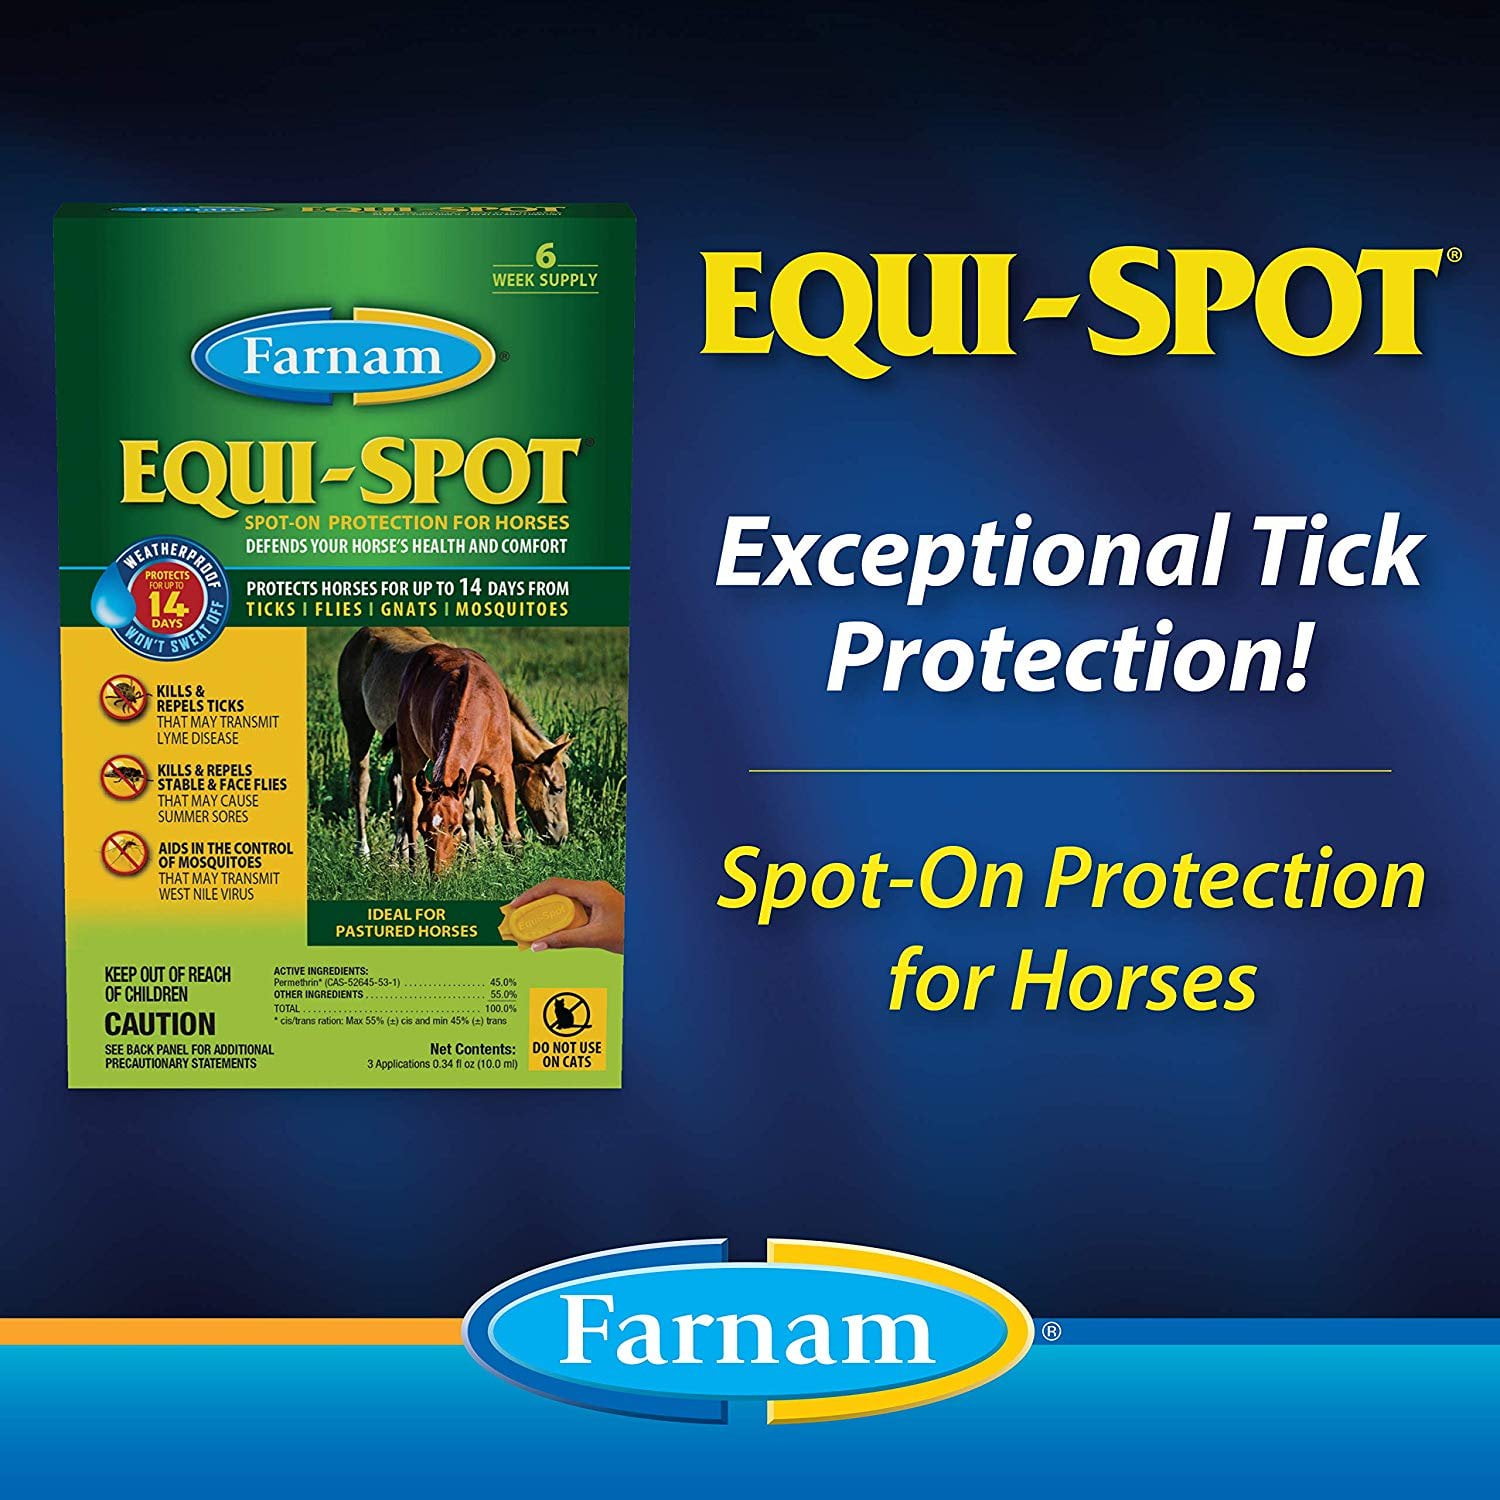 Farnam Equi-SpotSpot On Protection for Horses 12 Week SupplyFly Control 